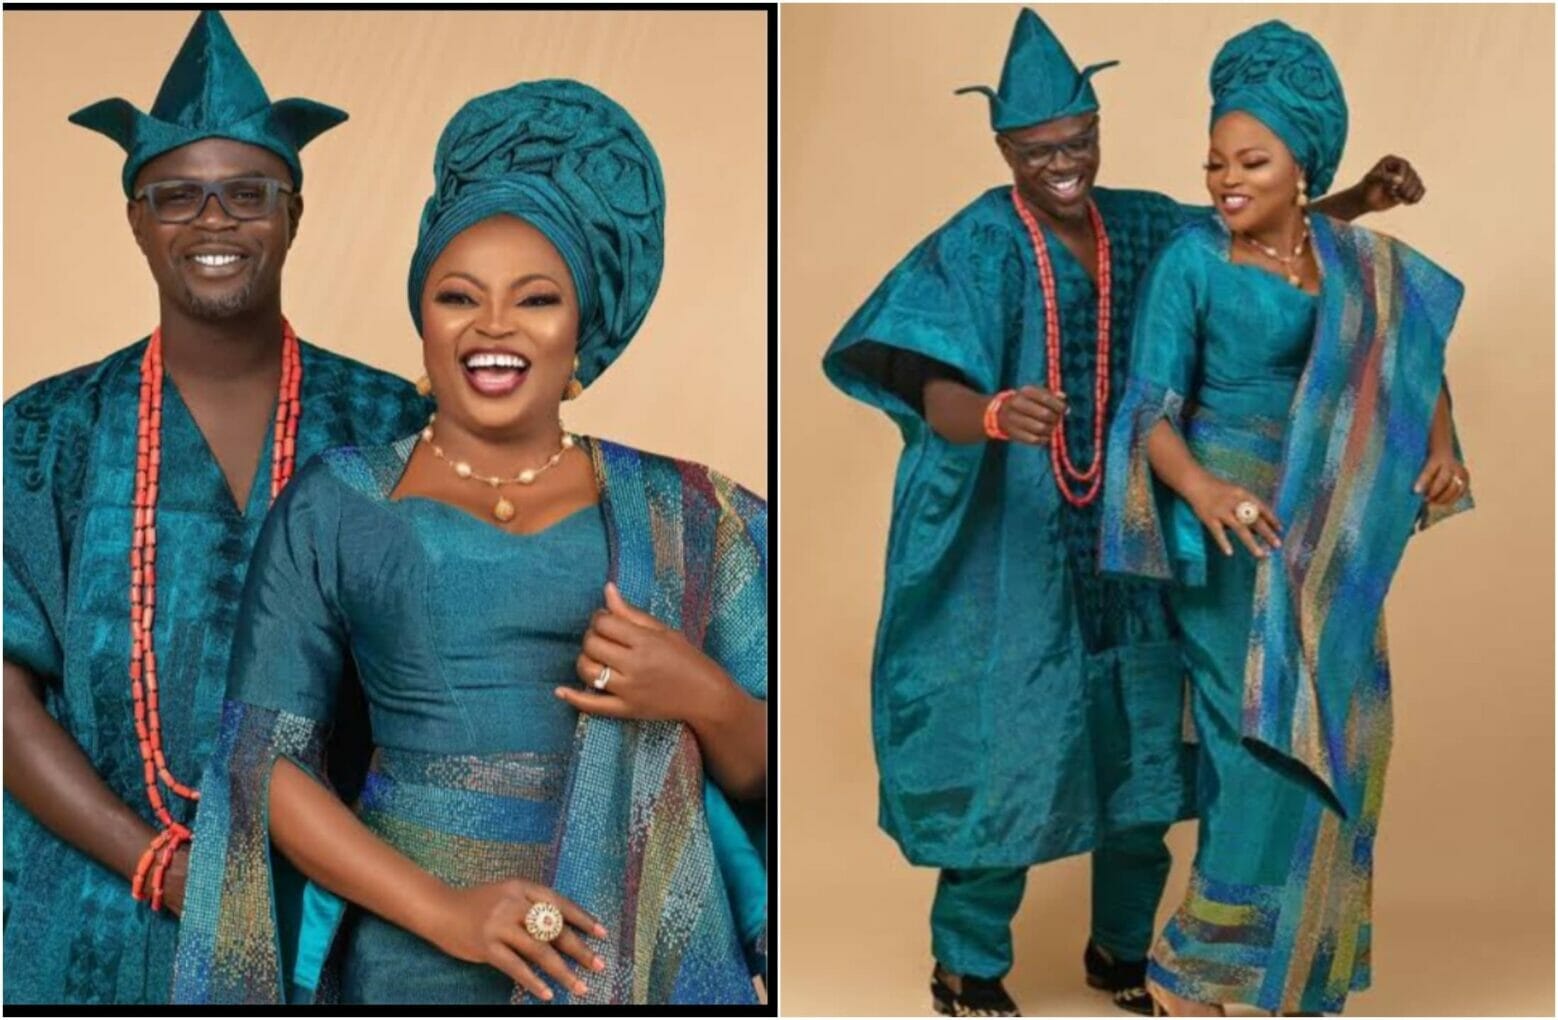 They are heavenly made for each other" Close friends of Funke Akindele  speak out on her marital crisis - Kemi Filani News